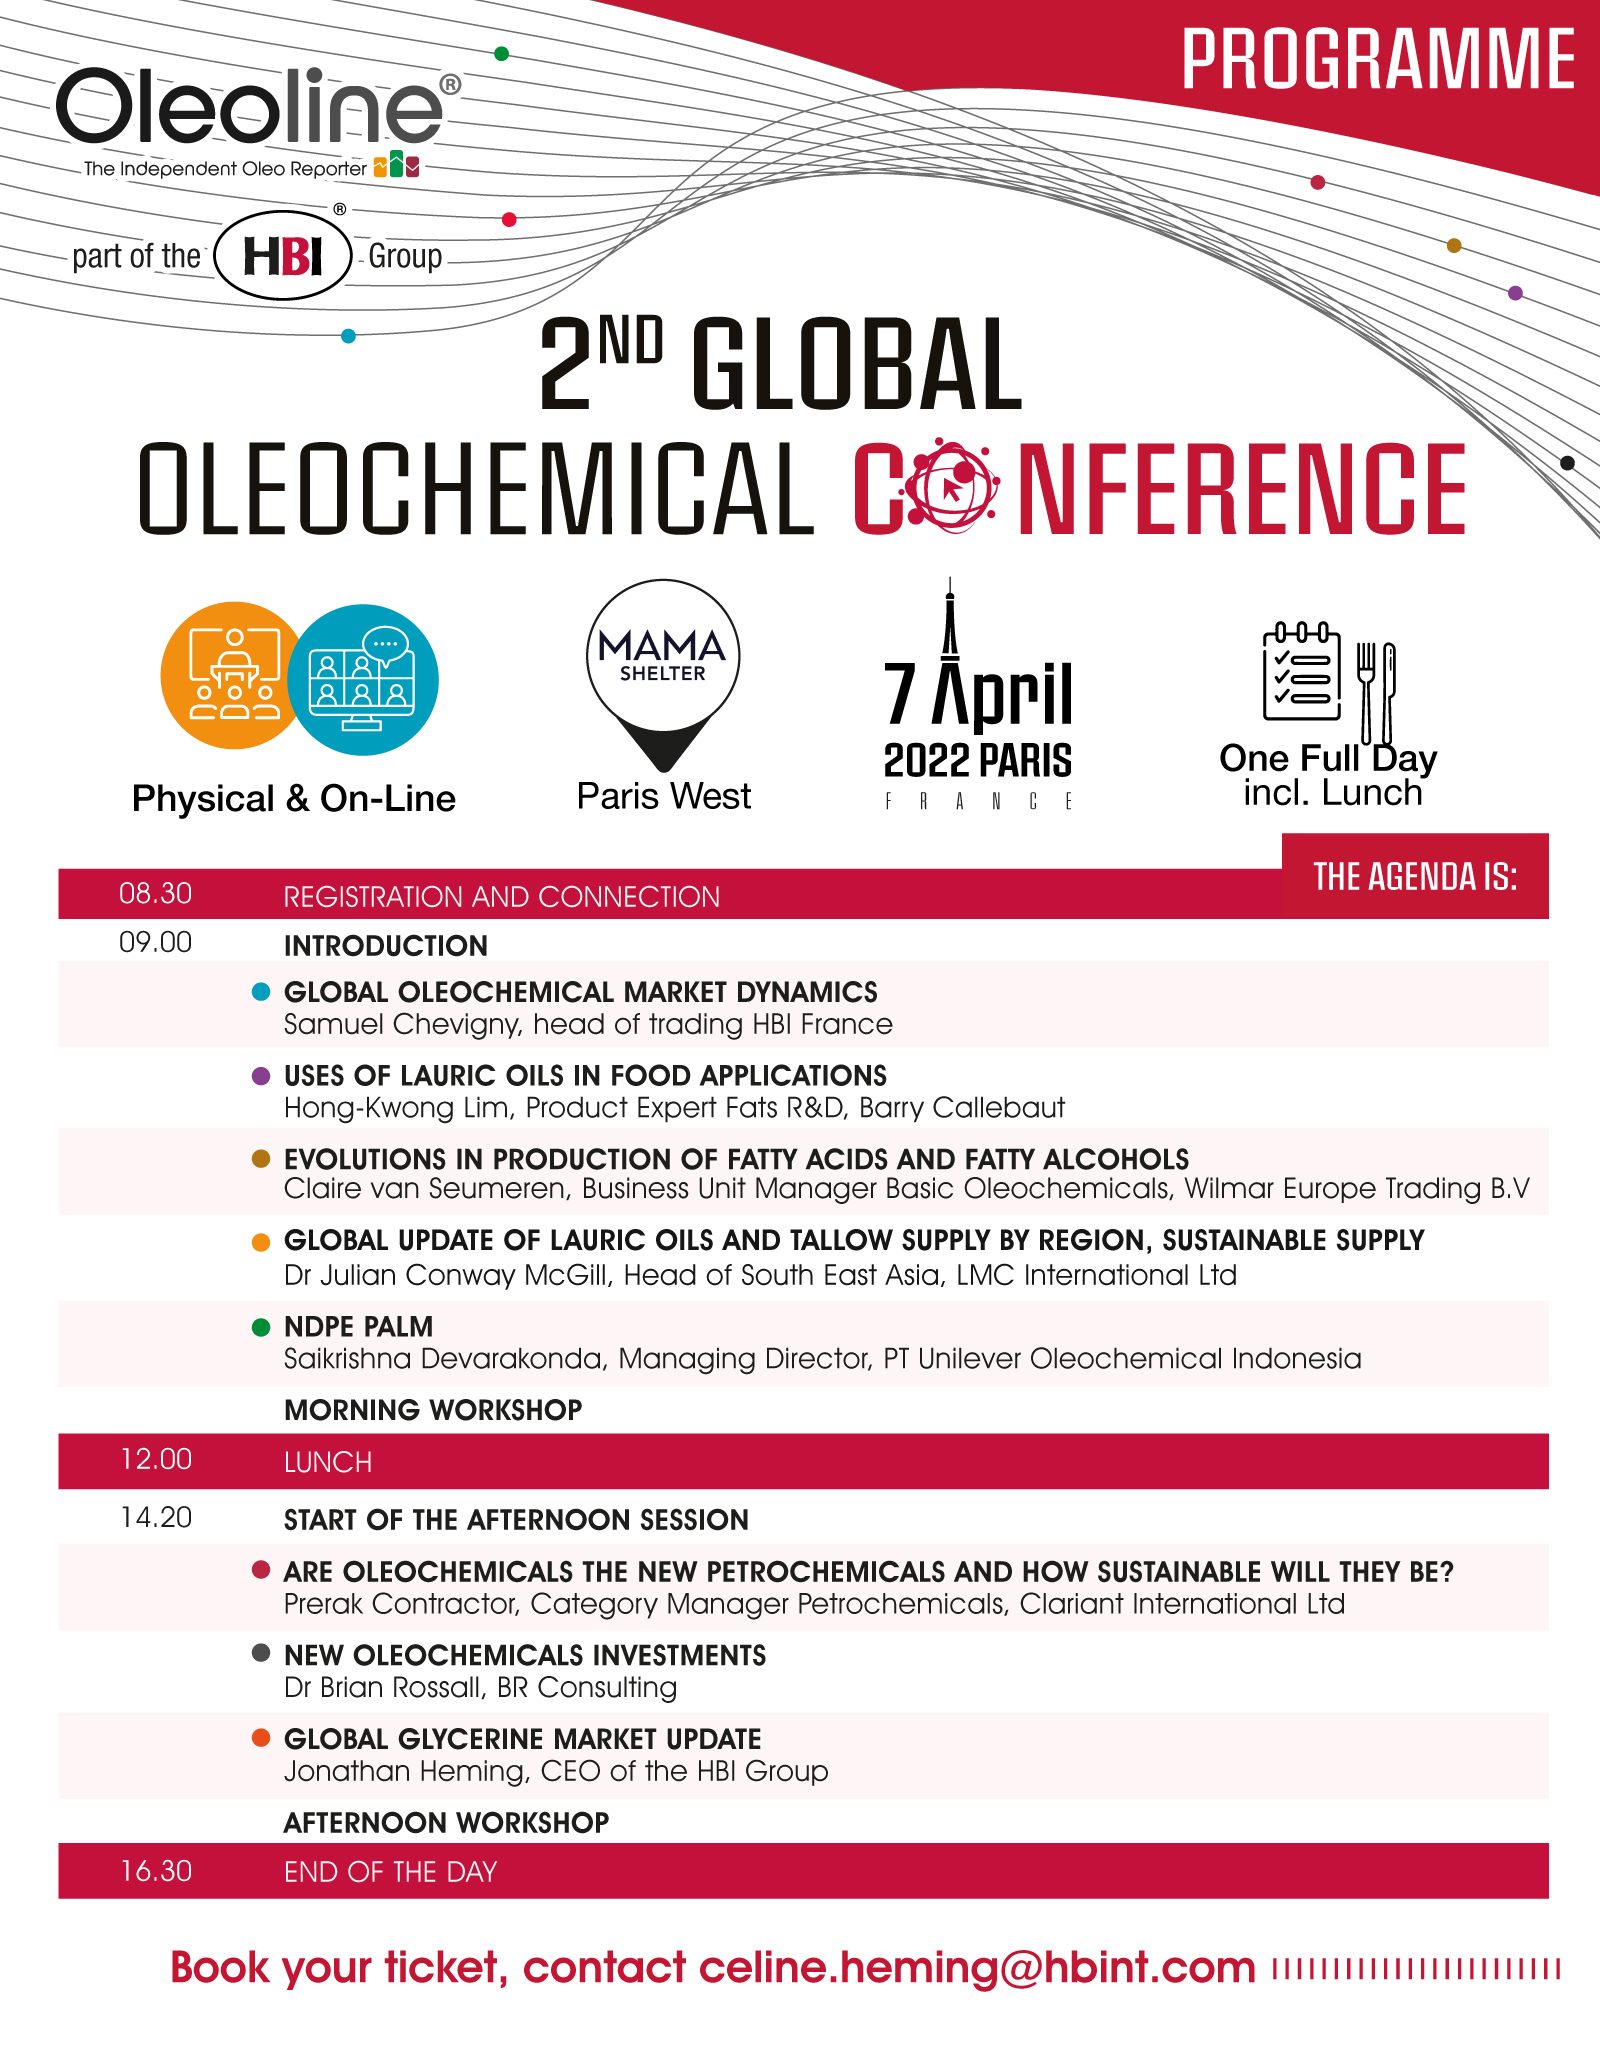 The final agenda of the Oleochemical Conference is released